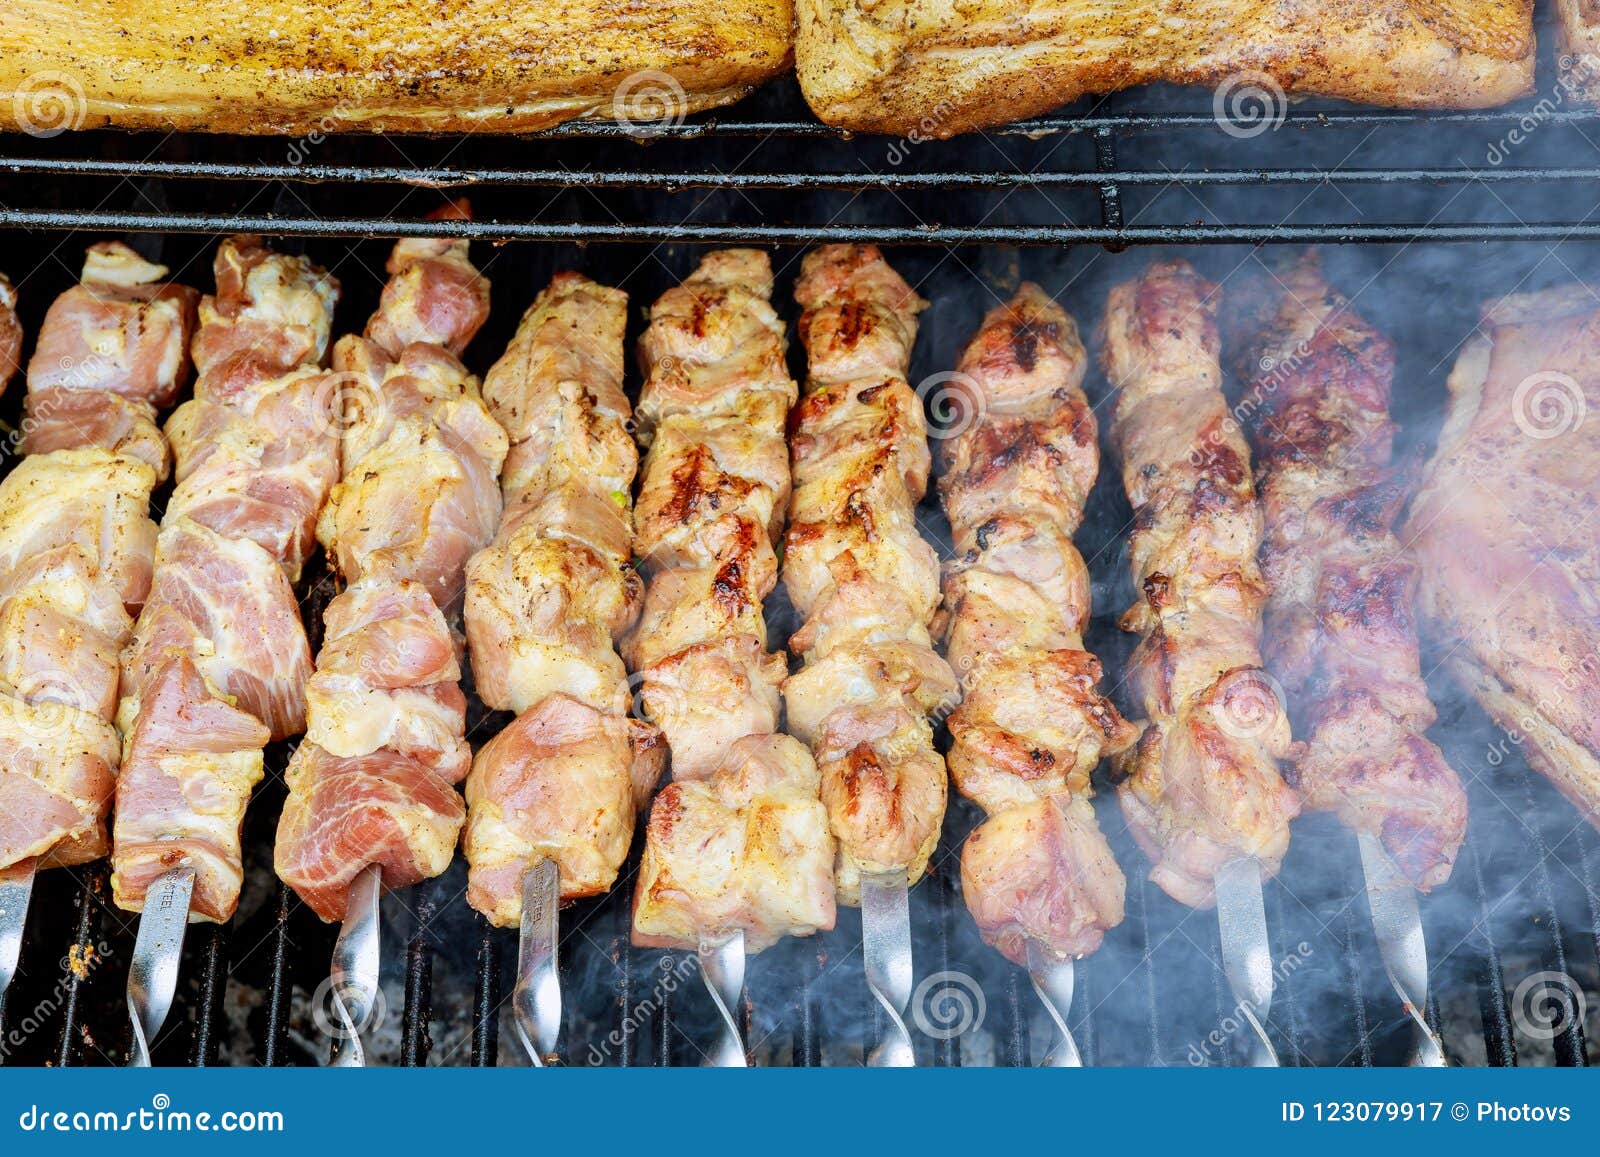 Fresh Meat Shish Kebab Prepared on a Grill. Stock Image - Image of ...